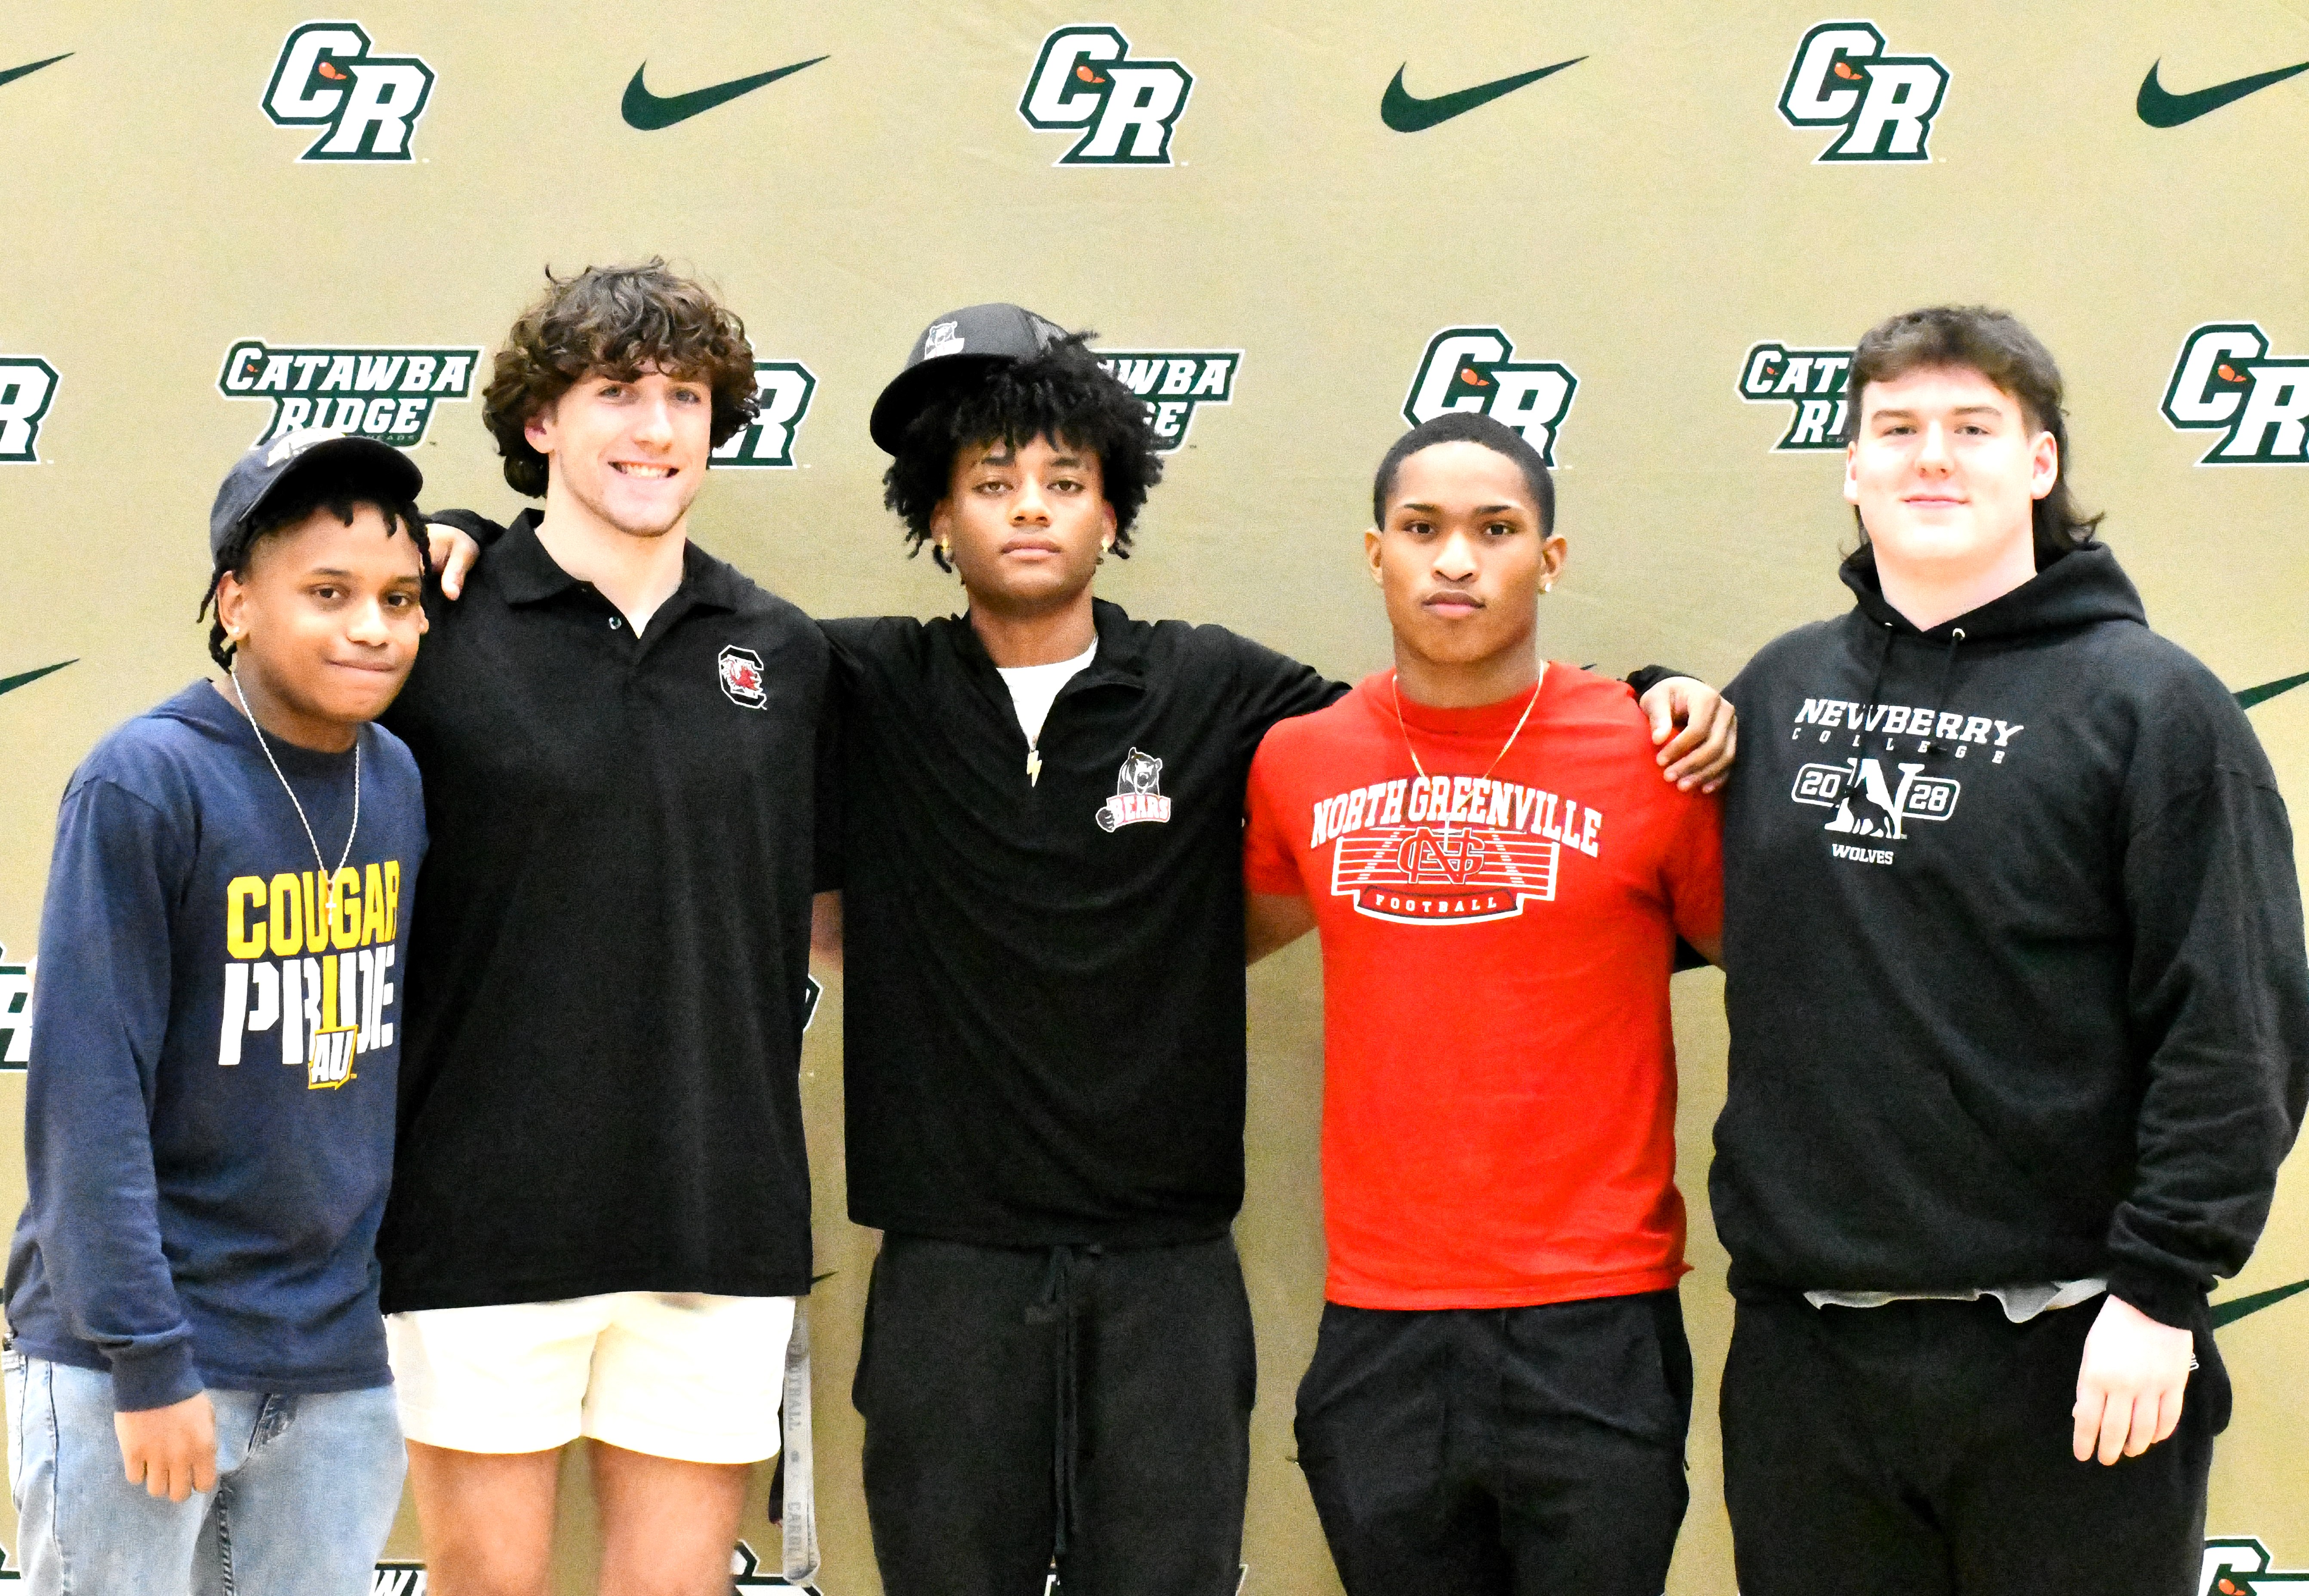 Five Copperhead gridiron players sign to tackle college football